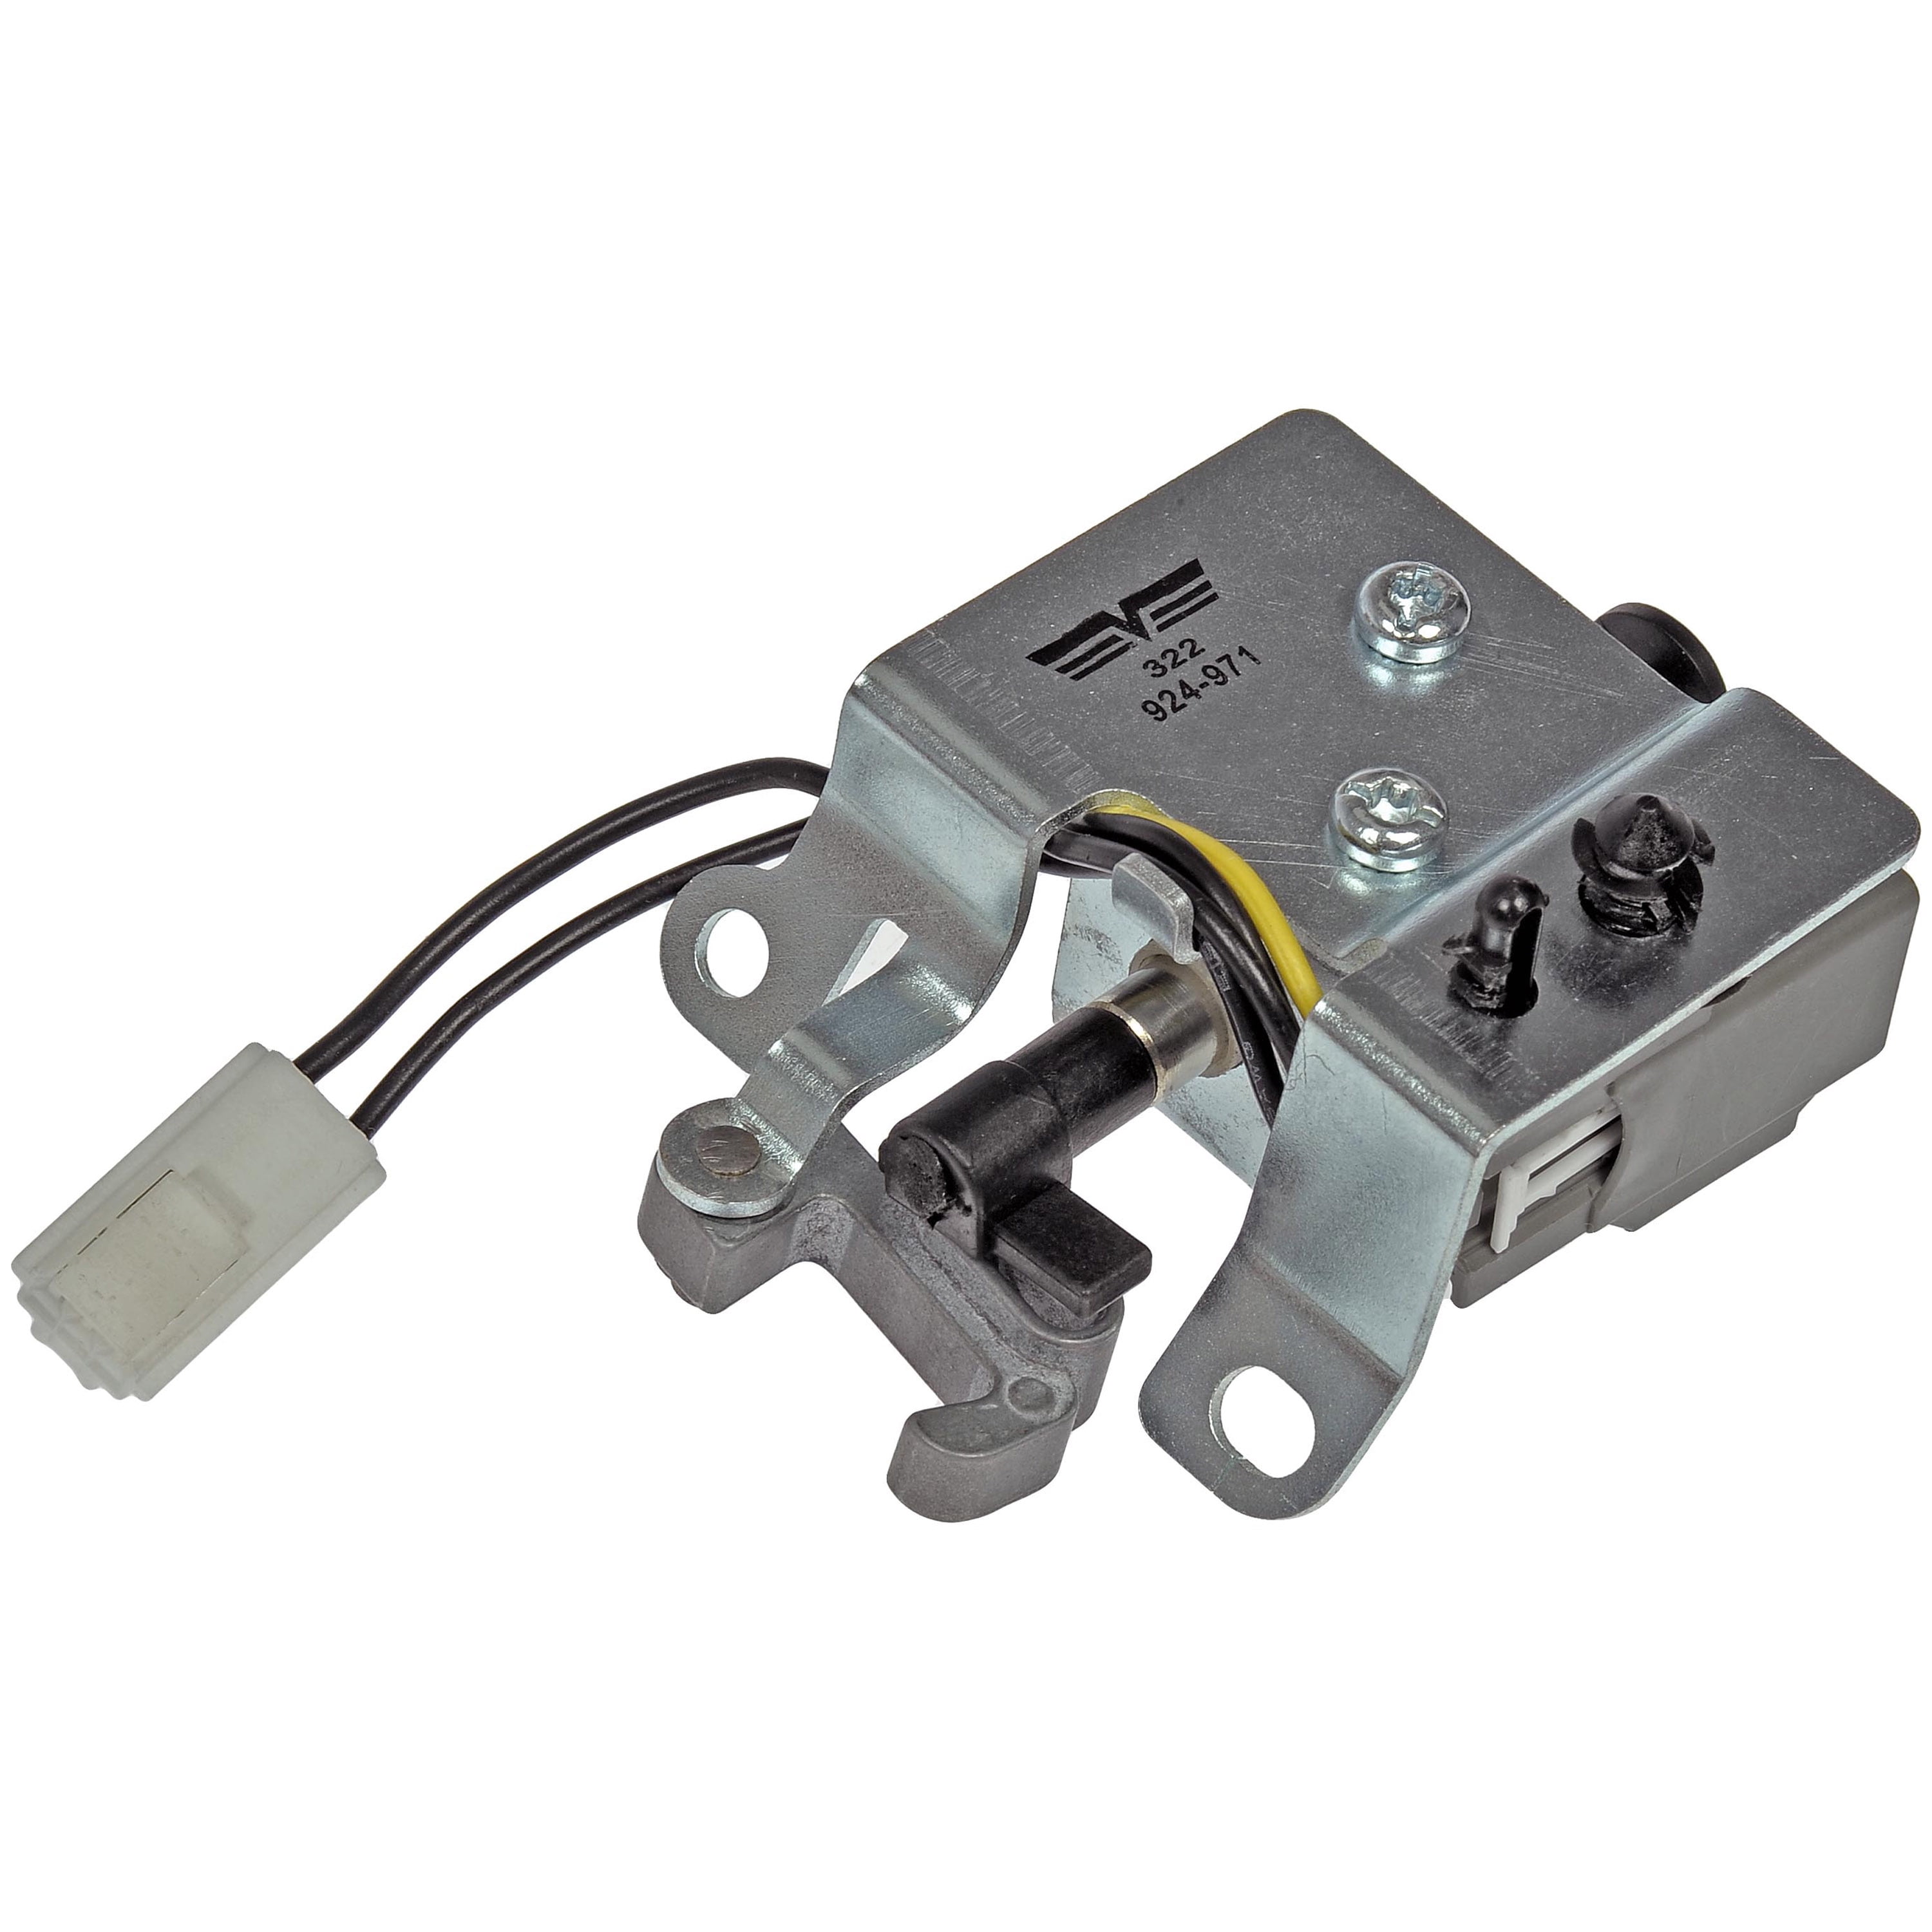 Dorman 924-970 Shift Interlock Solenoid Compatible with Select Ford/Lincoln Models 